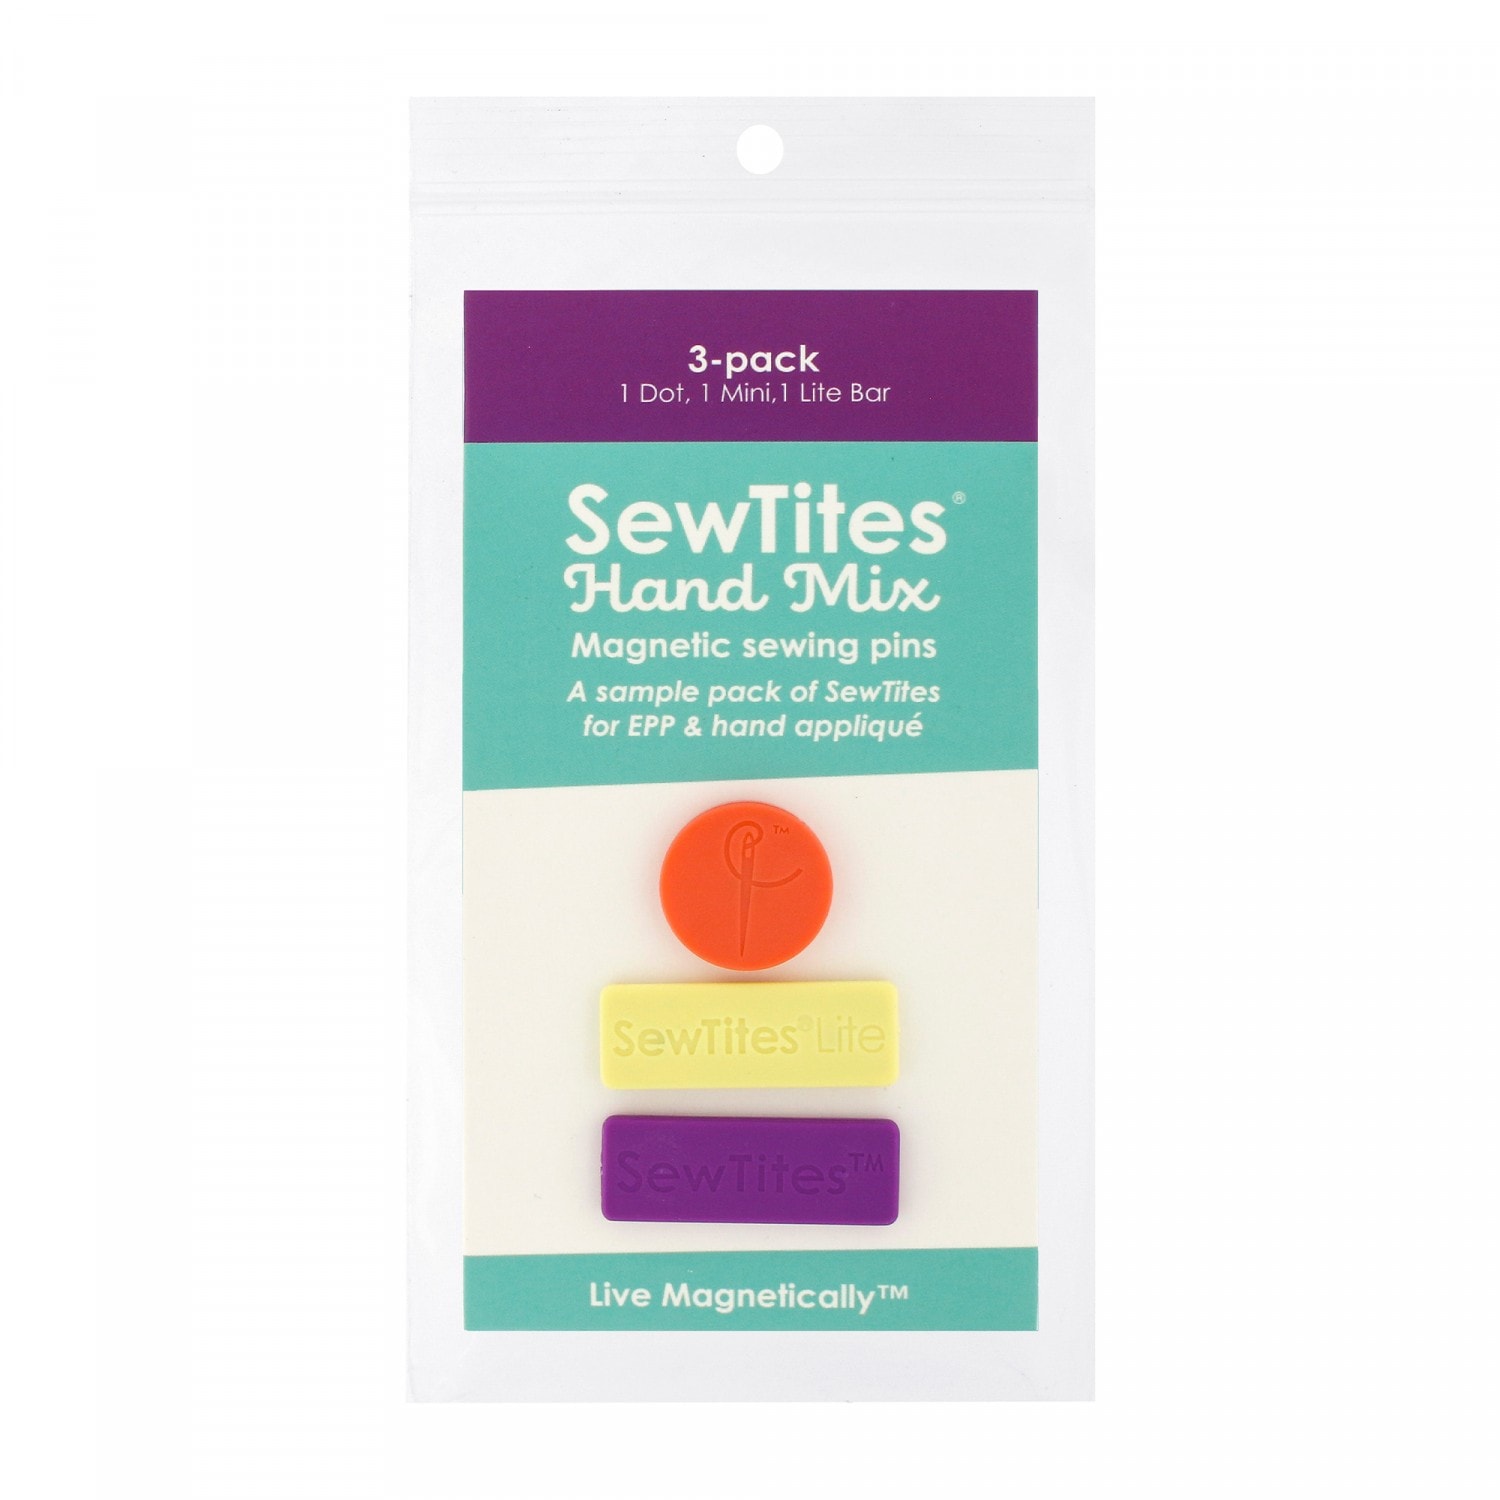 SewTites Hand Mix Magnetic Sewing Pins